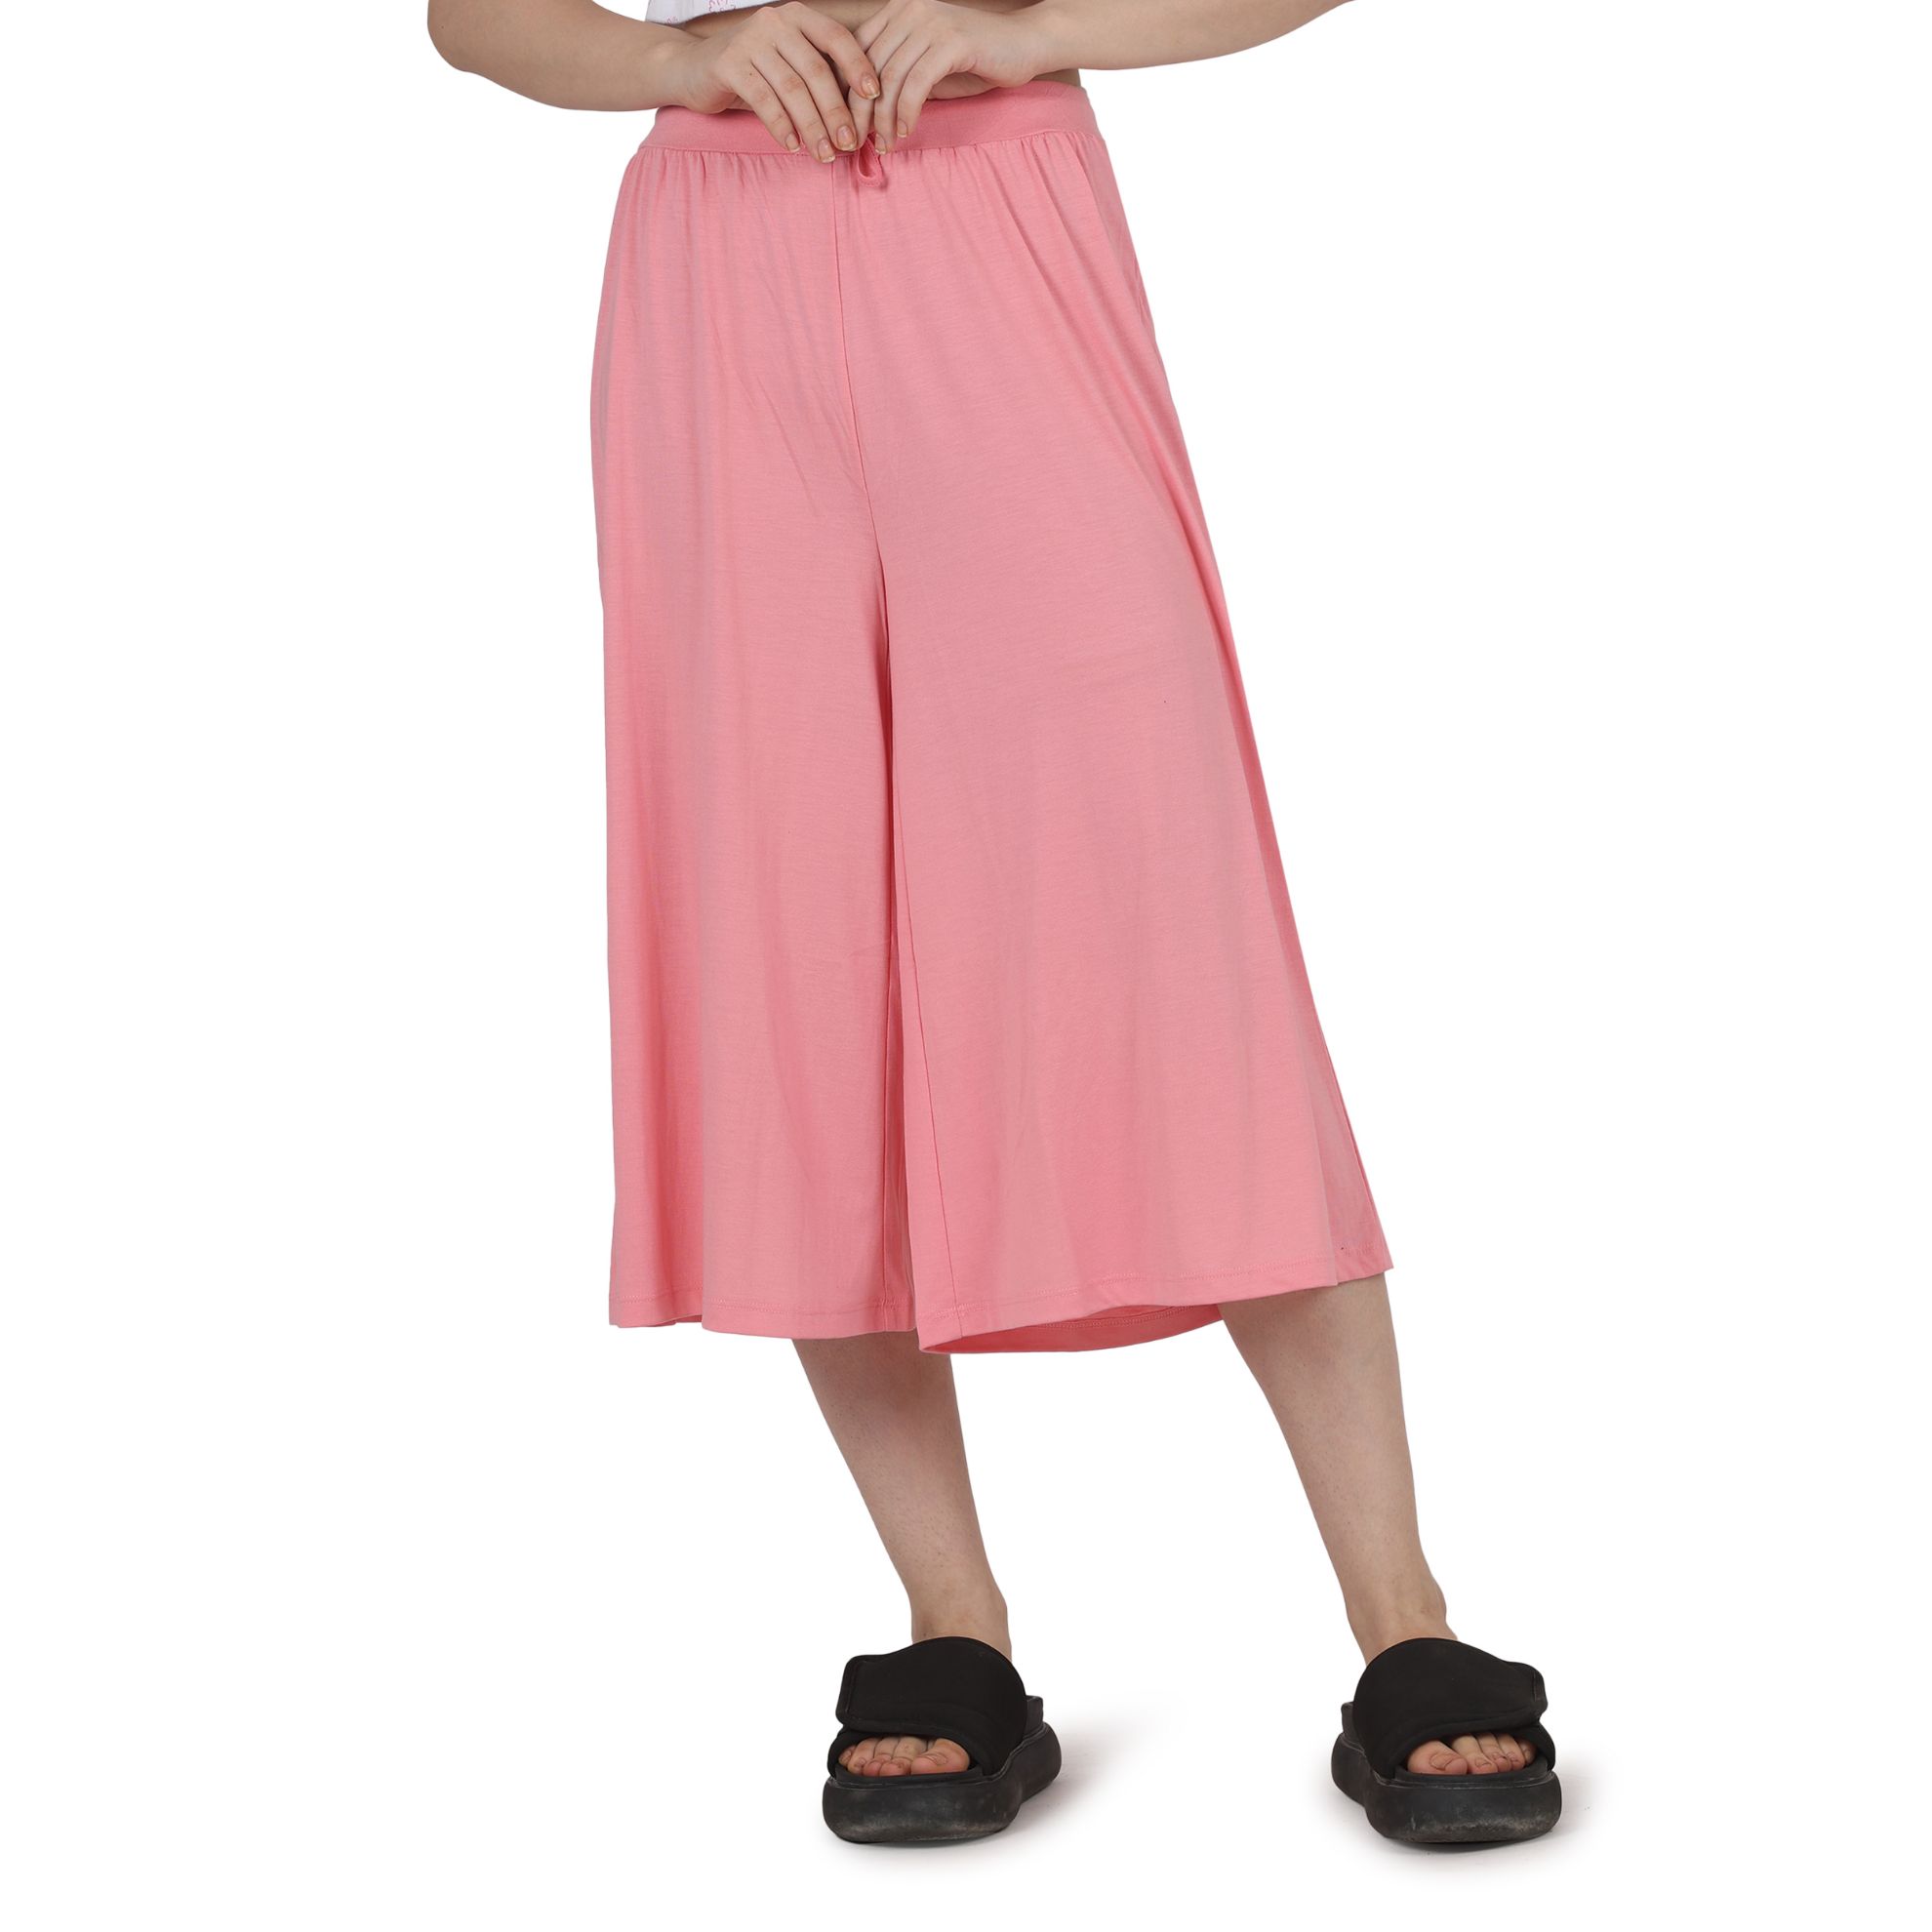 Frenchtrendz  Buy Frenchtrendz Poly Viscose Light Pink Short Palazzo Online